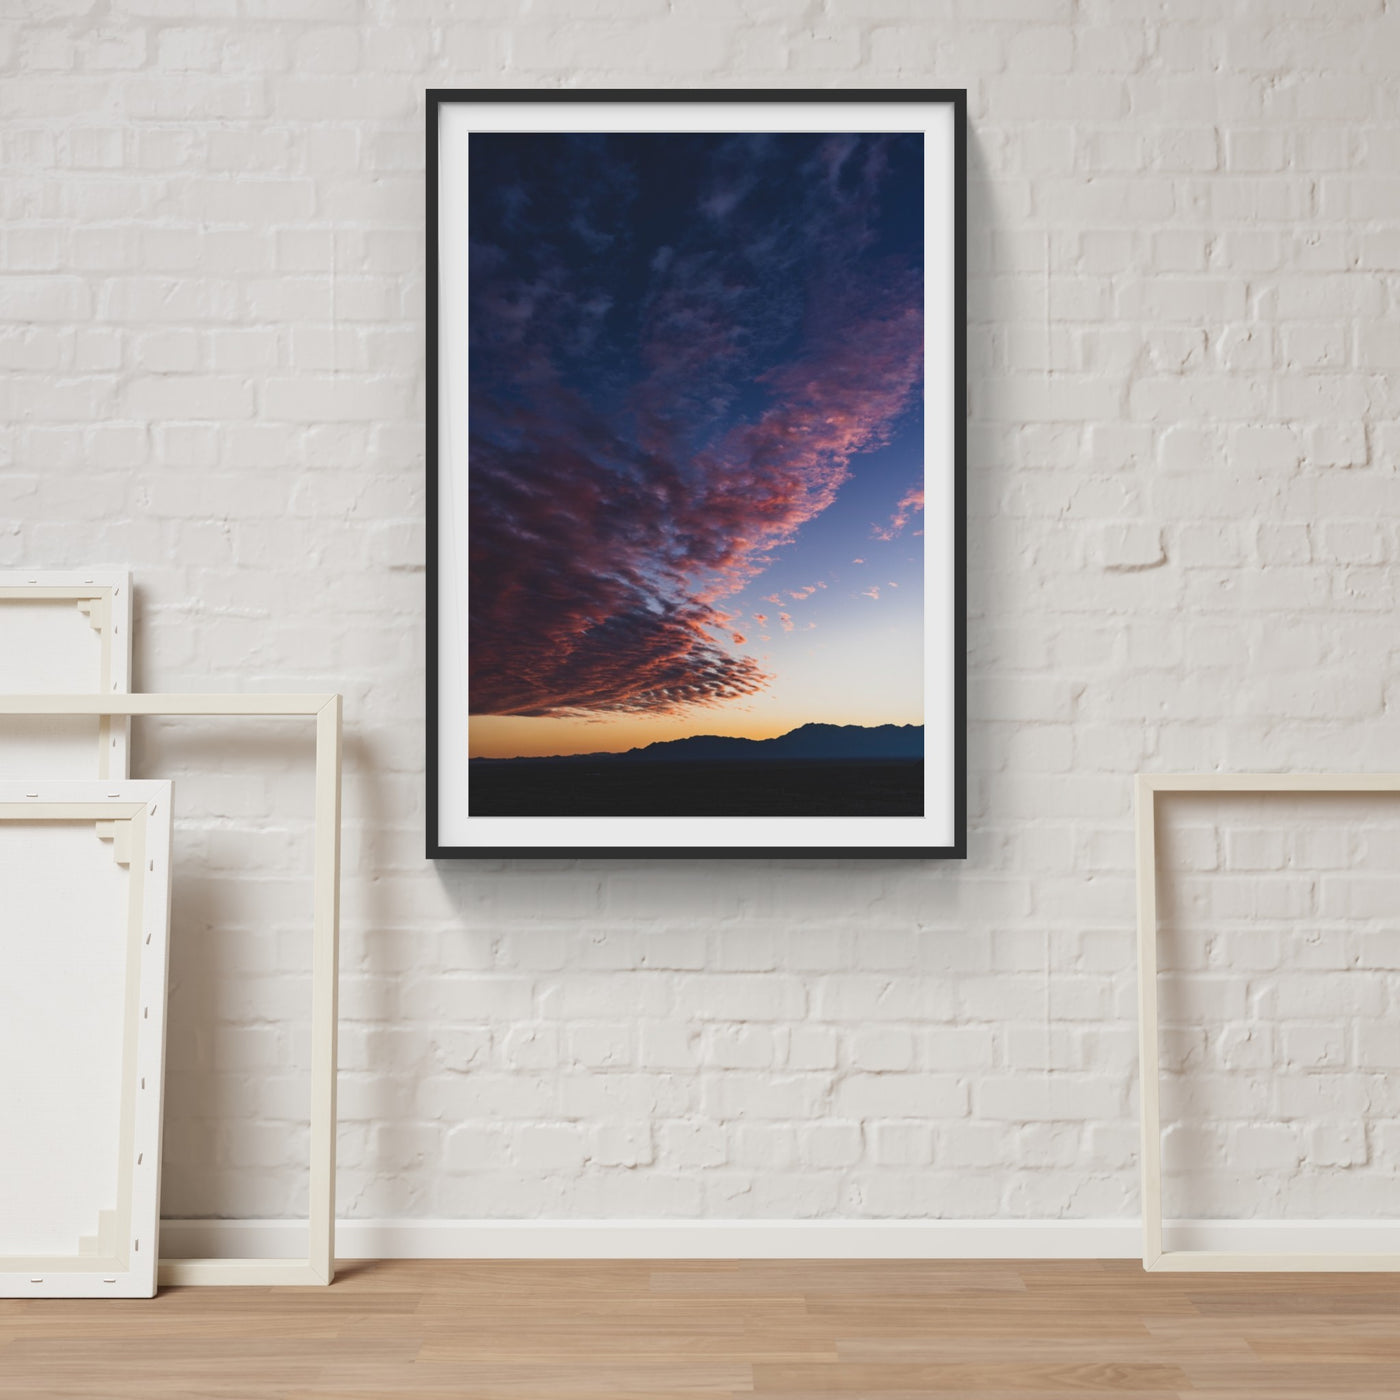 Dramatic colored sunset photograph on wall